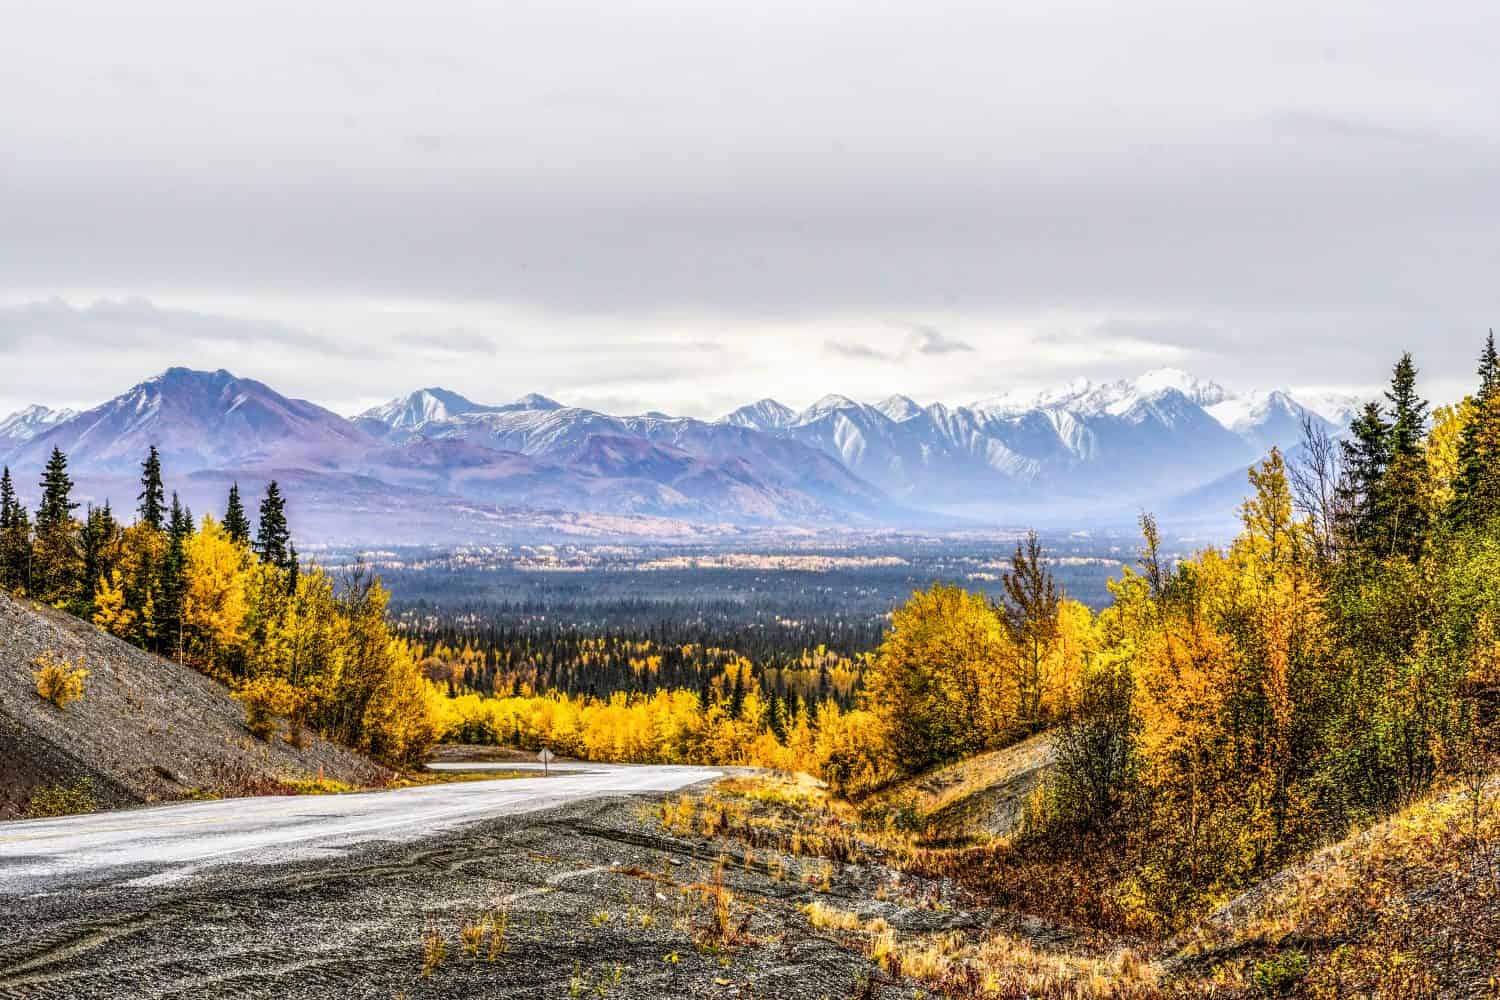 Snow Capped Mentasta Mountains And Fall Colored Forest Seen From The Tok Cutoff In Alaska